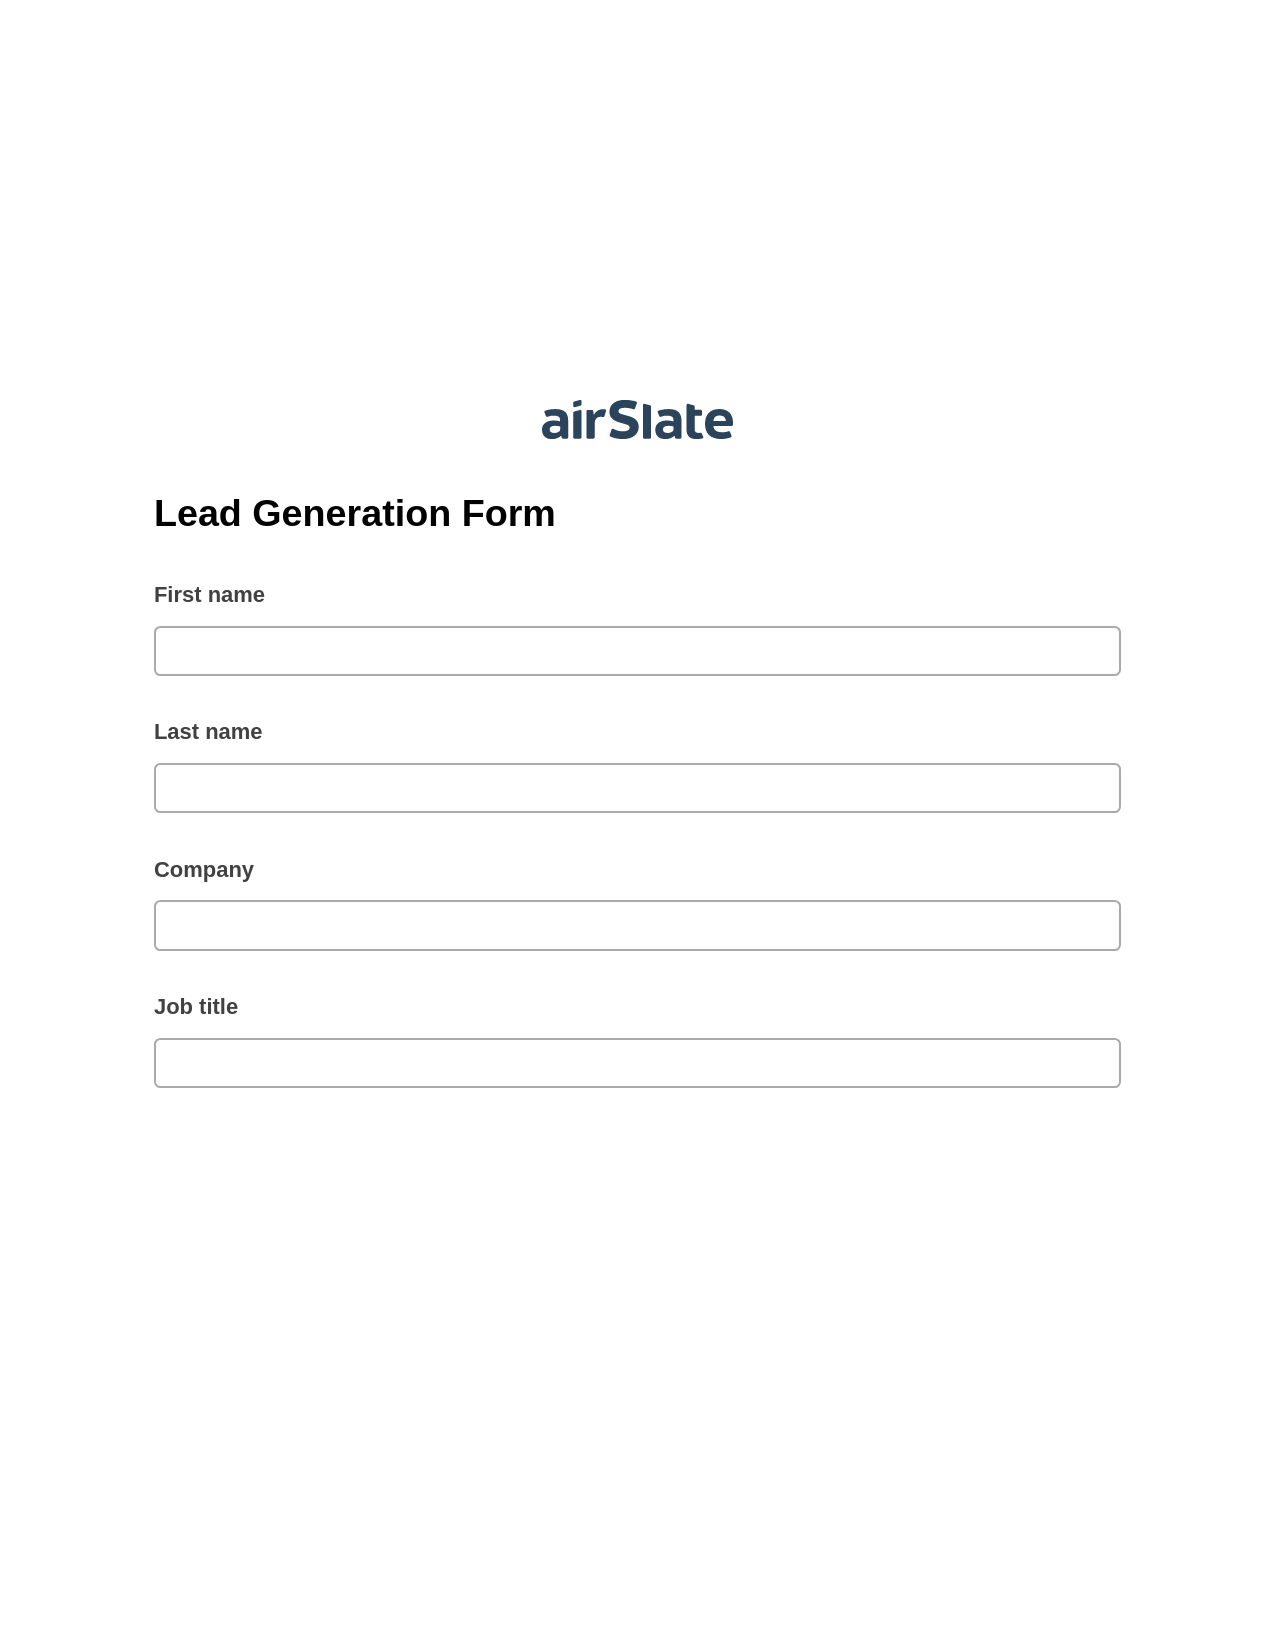 Lead Generation Form Pre-fill from MS Dynamics 365 Records, Send a Slate to Salesforce Contact Bot, Post-finish Document Bot